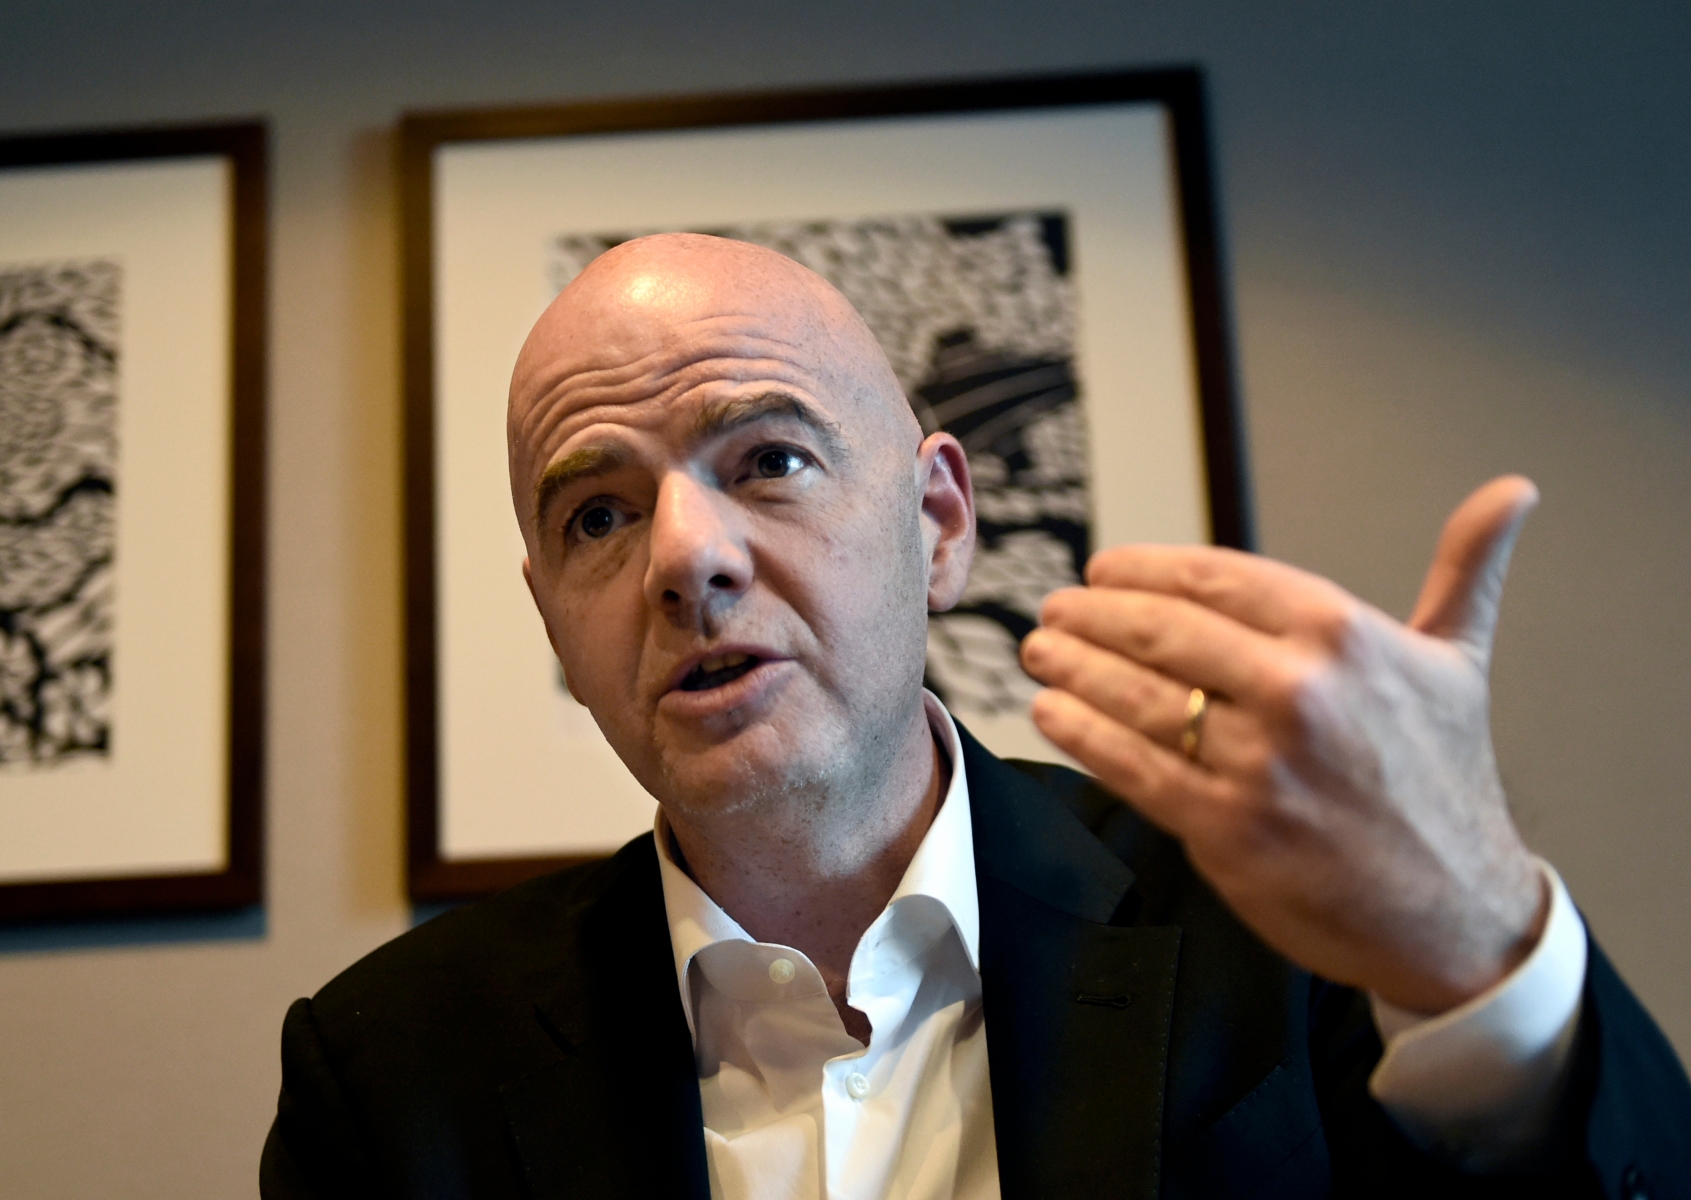 Gianni Infantino gestures  during a press conference in Copenhagen on Monday, Nov. 23, 2015. The three FIFA-Candidates presented themselves to the Nordic soccer chairmen during a meeting at Hotel Hilton in Copenhagen. (Lars Poulsen/POLFOTO via AP) DENMARK OUTinfantino DENMARK FIFA PRESIDENT CANDIDATES